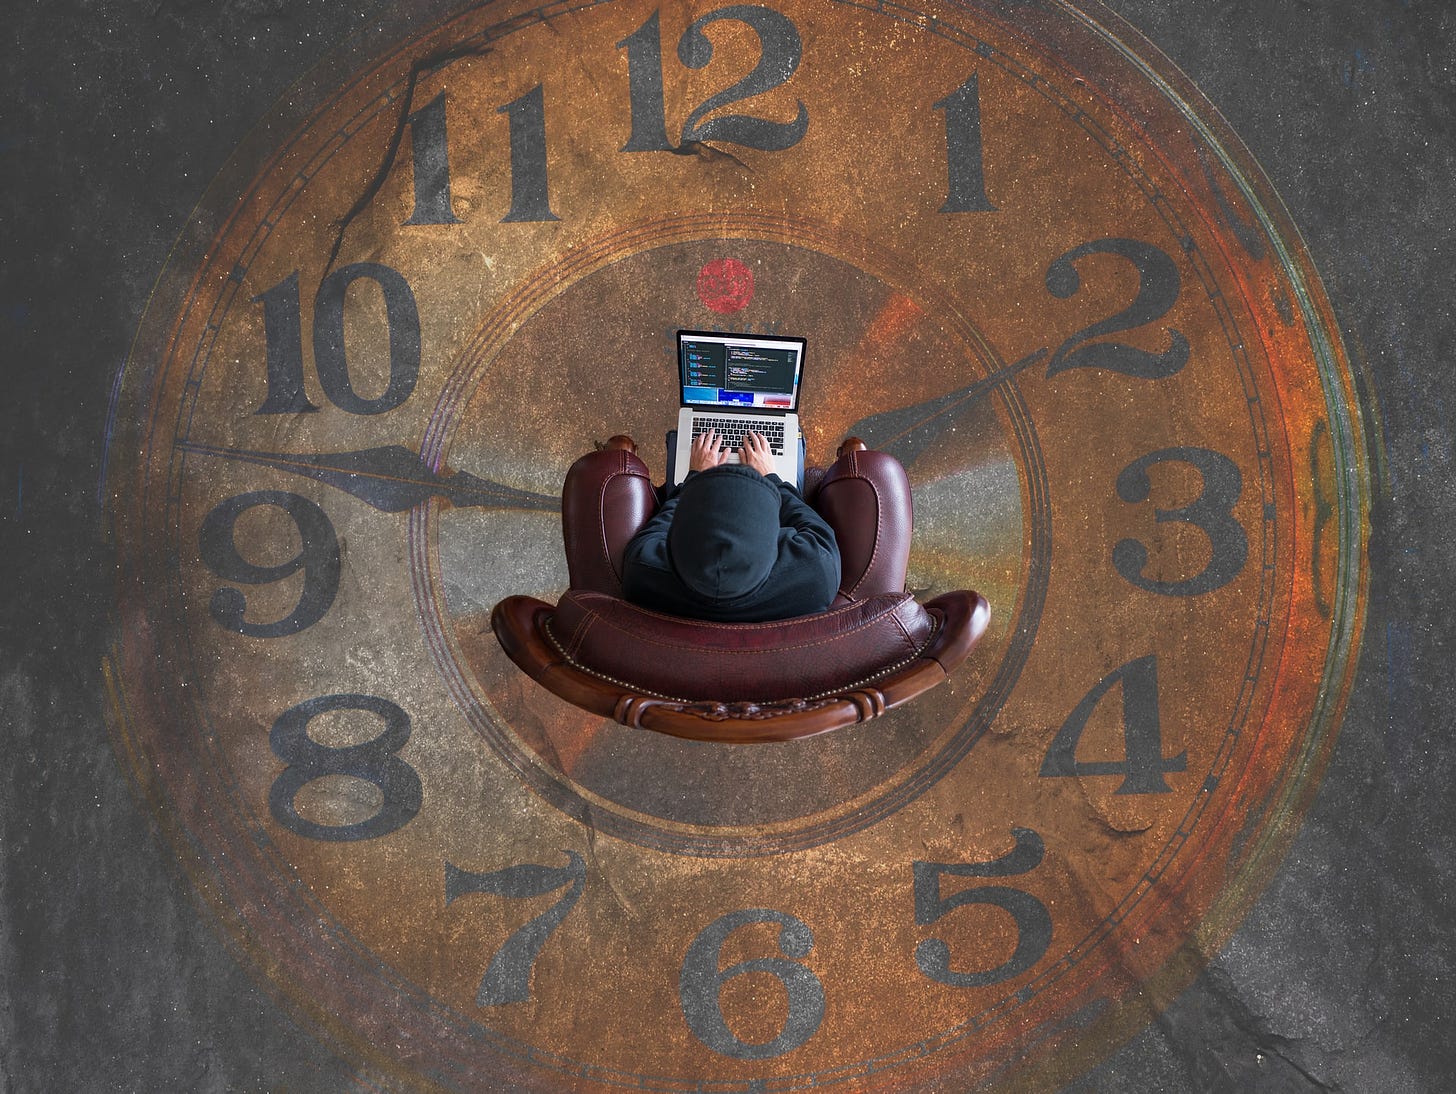 Person sitting in a chair on a clock face painted on the floor.